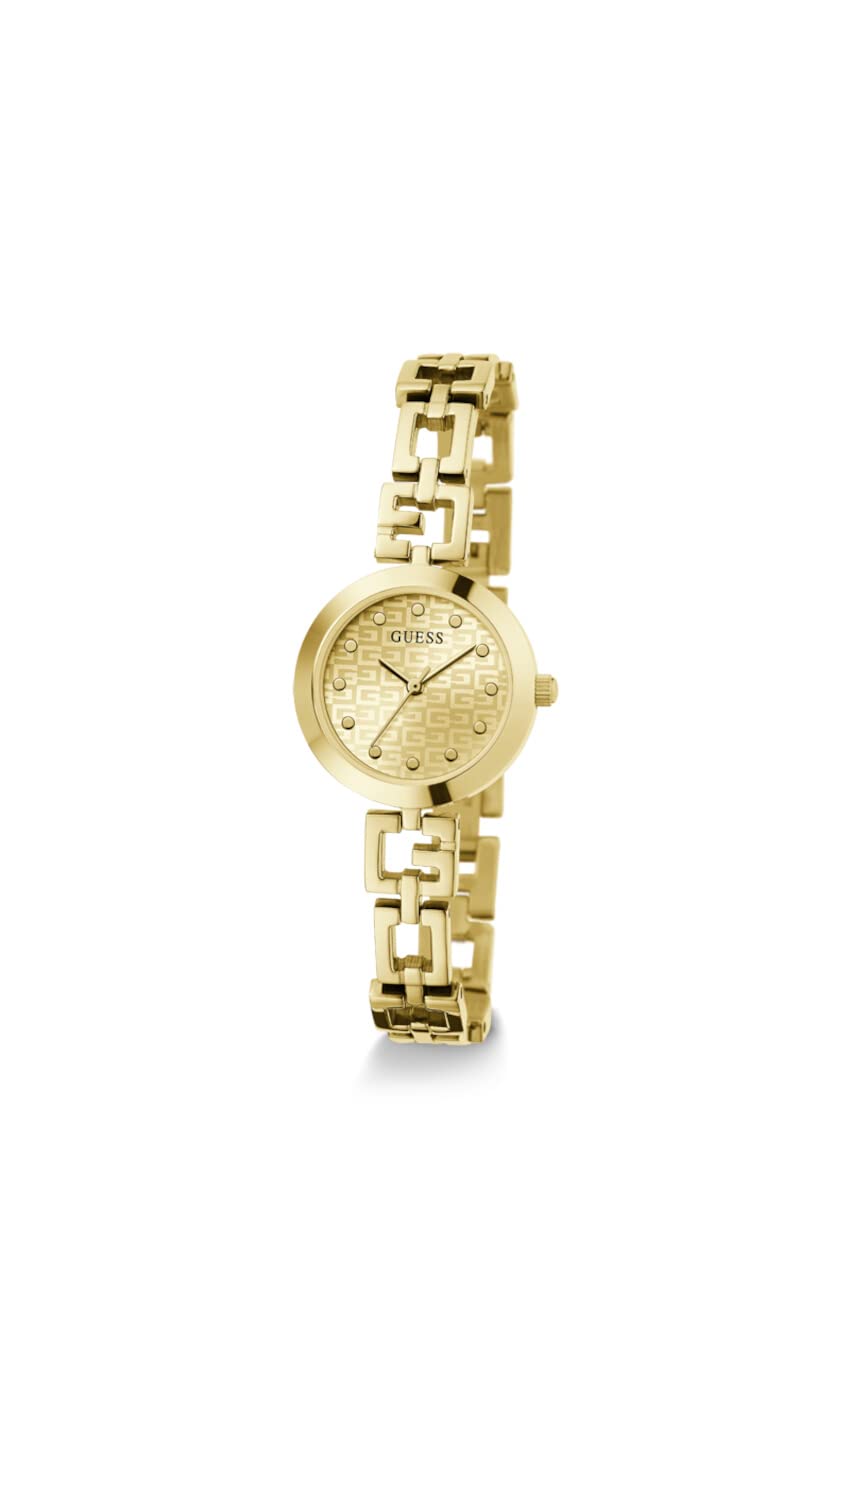 GUESS Ladies 26mm Watch - Gold Tone Strap Champagne Dial Gold Tone Case